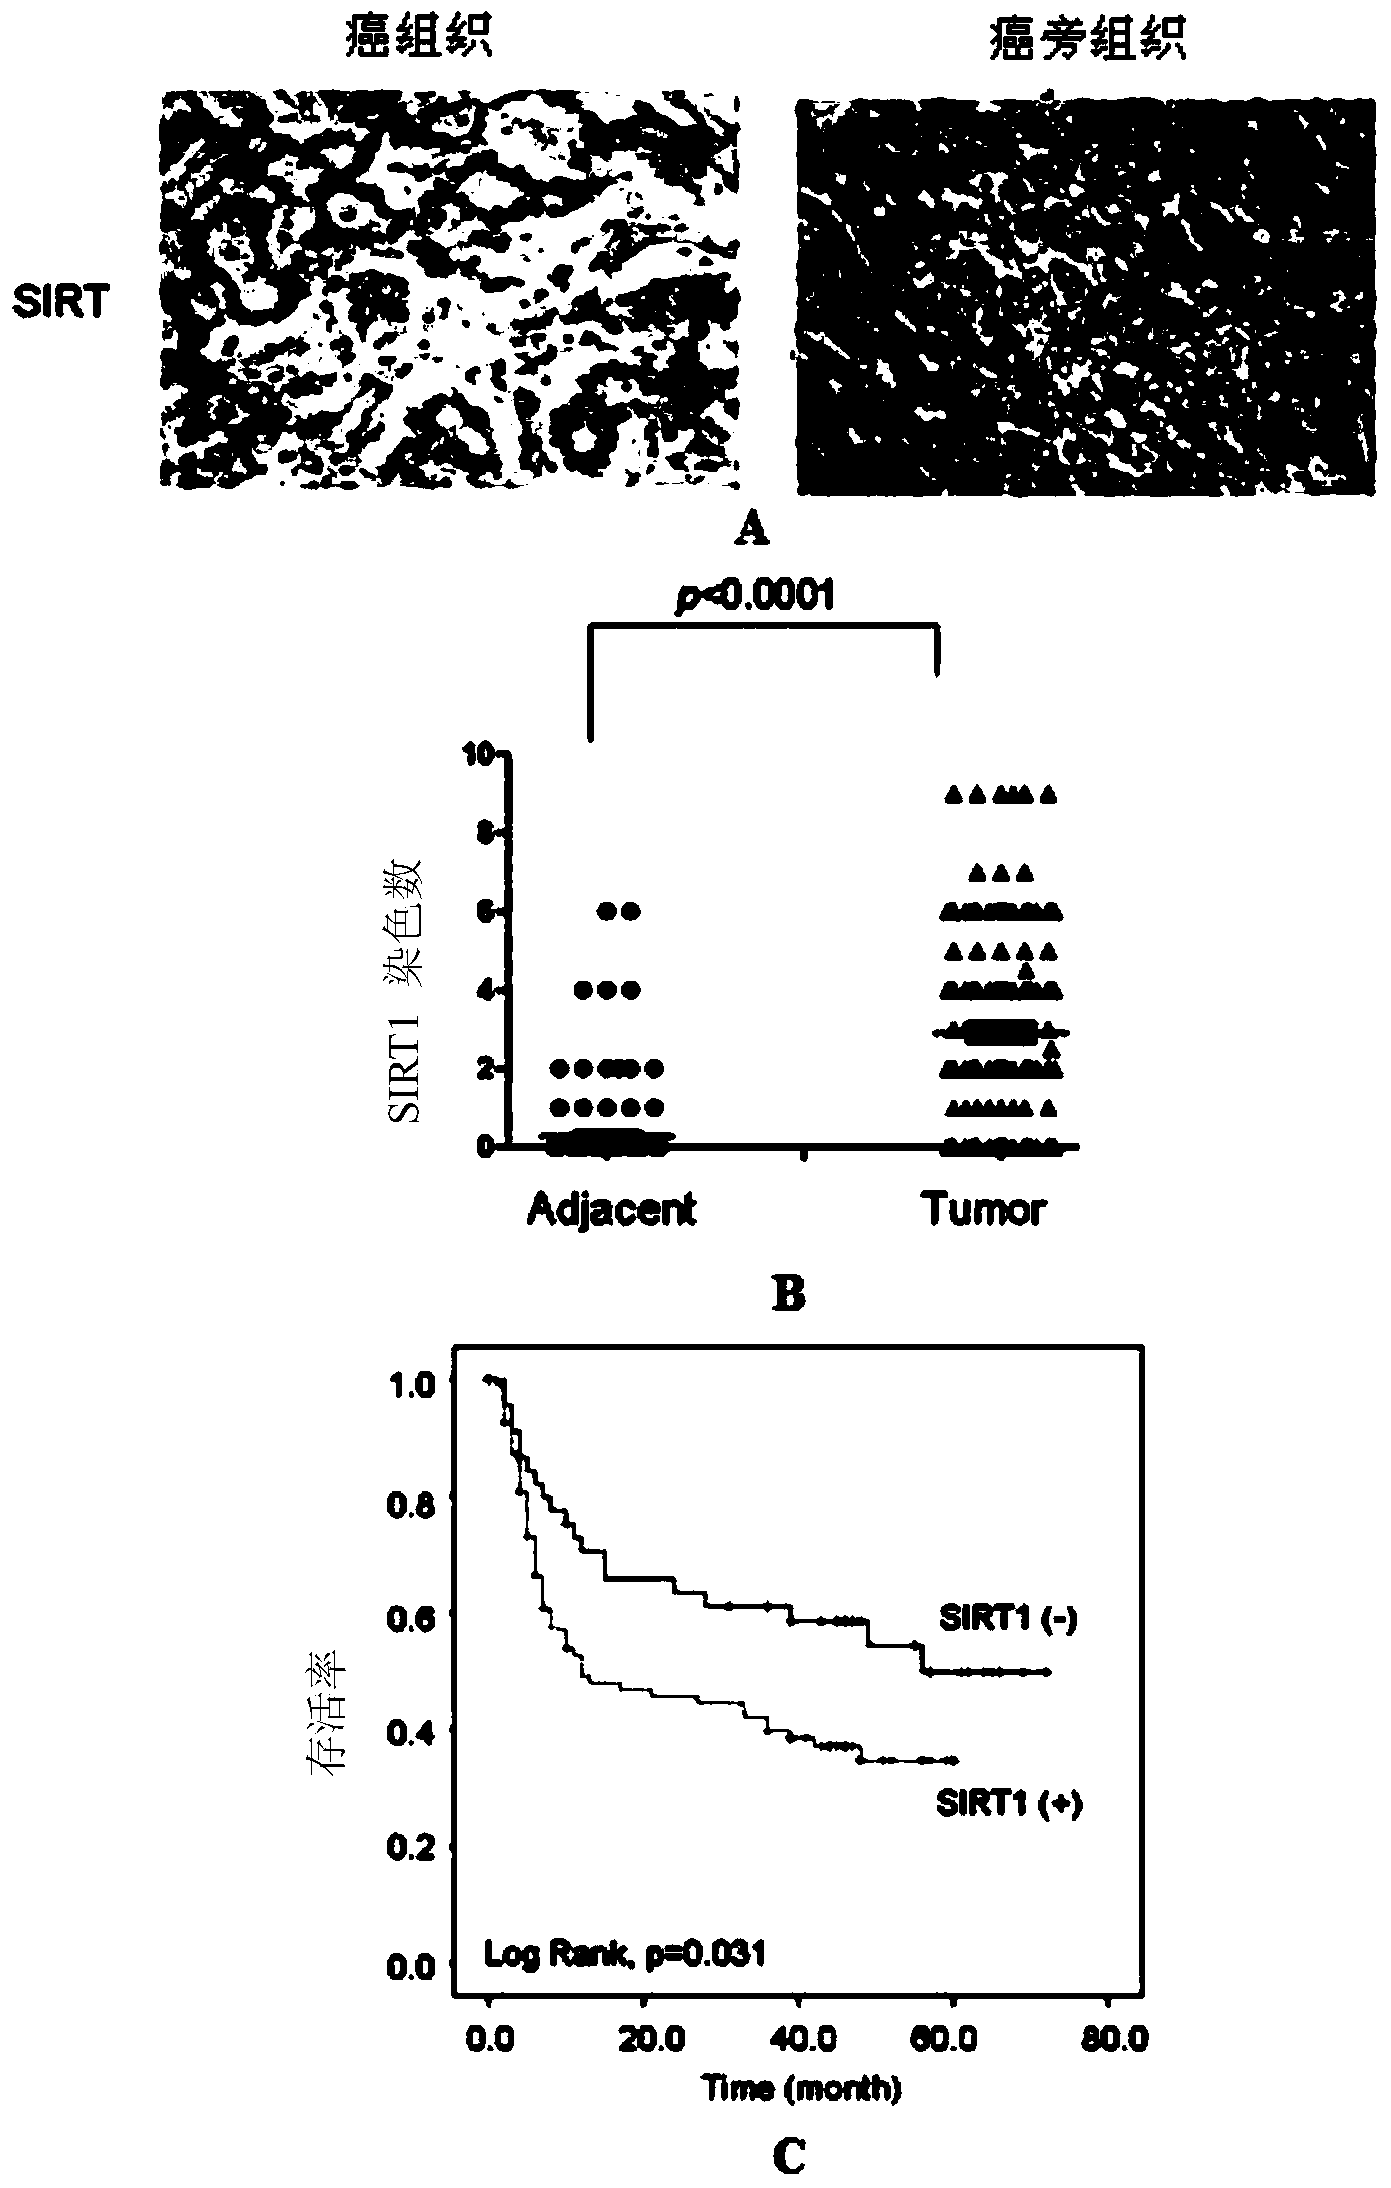 Application of SIRT1 inhibitor and sorafenib in preparing medicaments for treating liver cancer